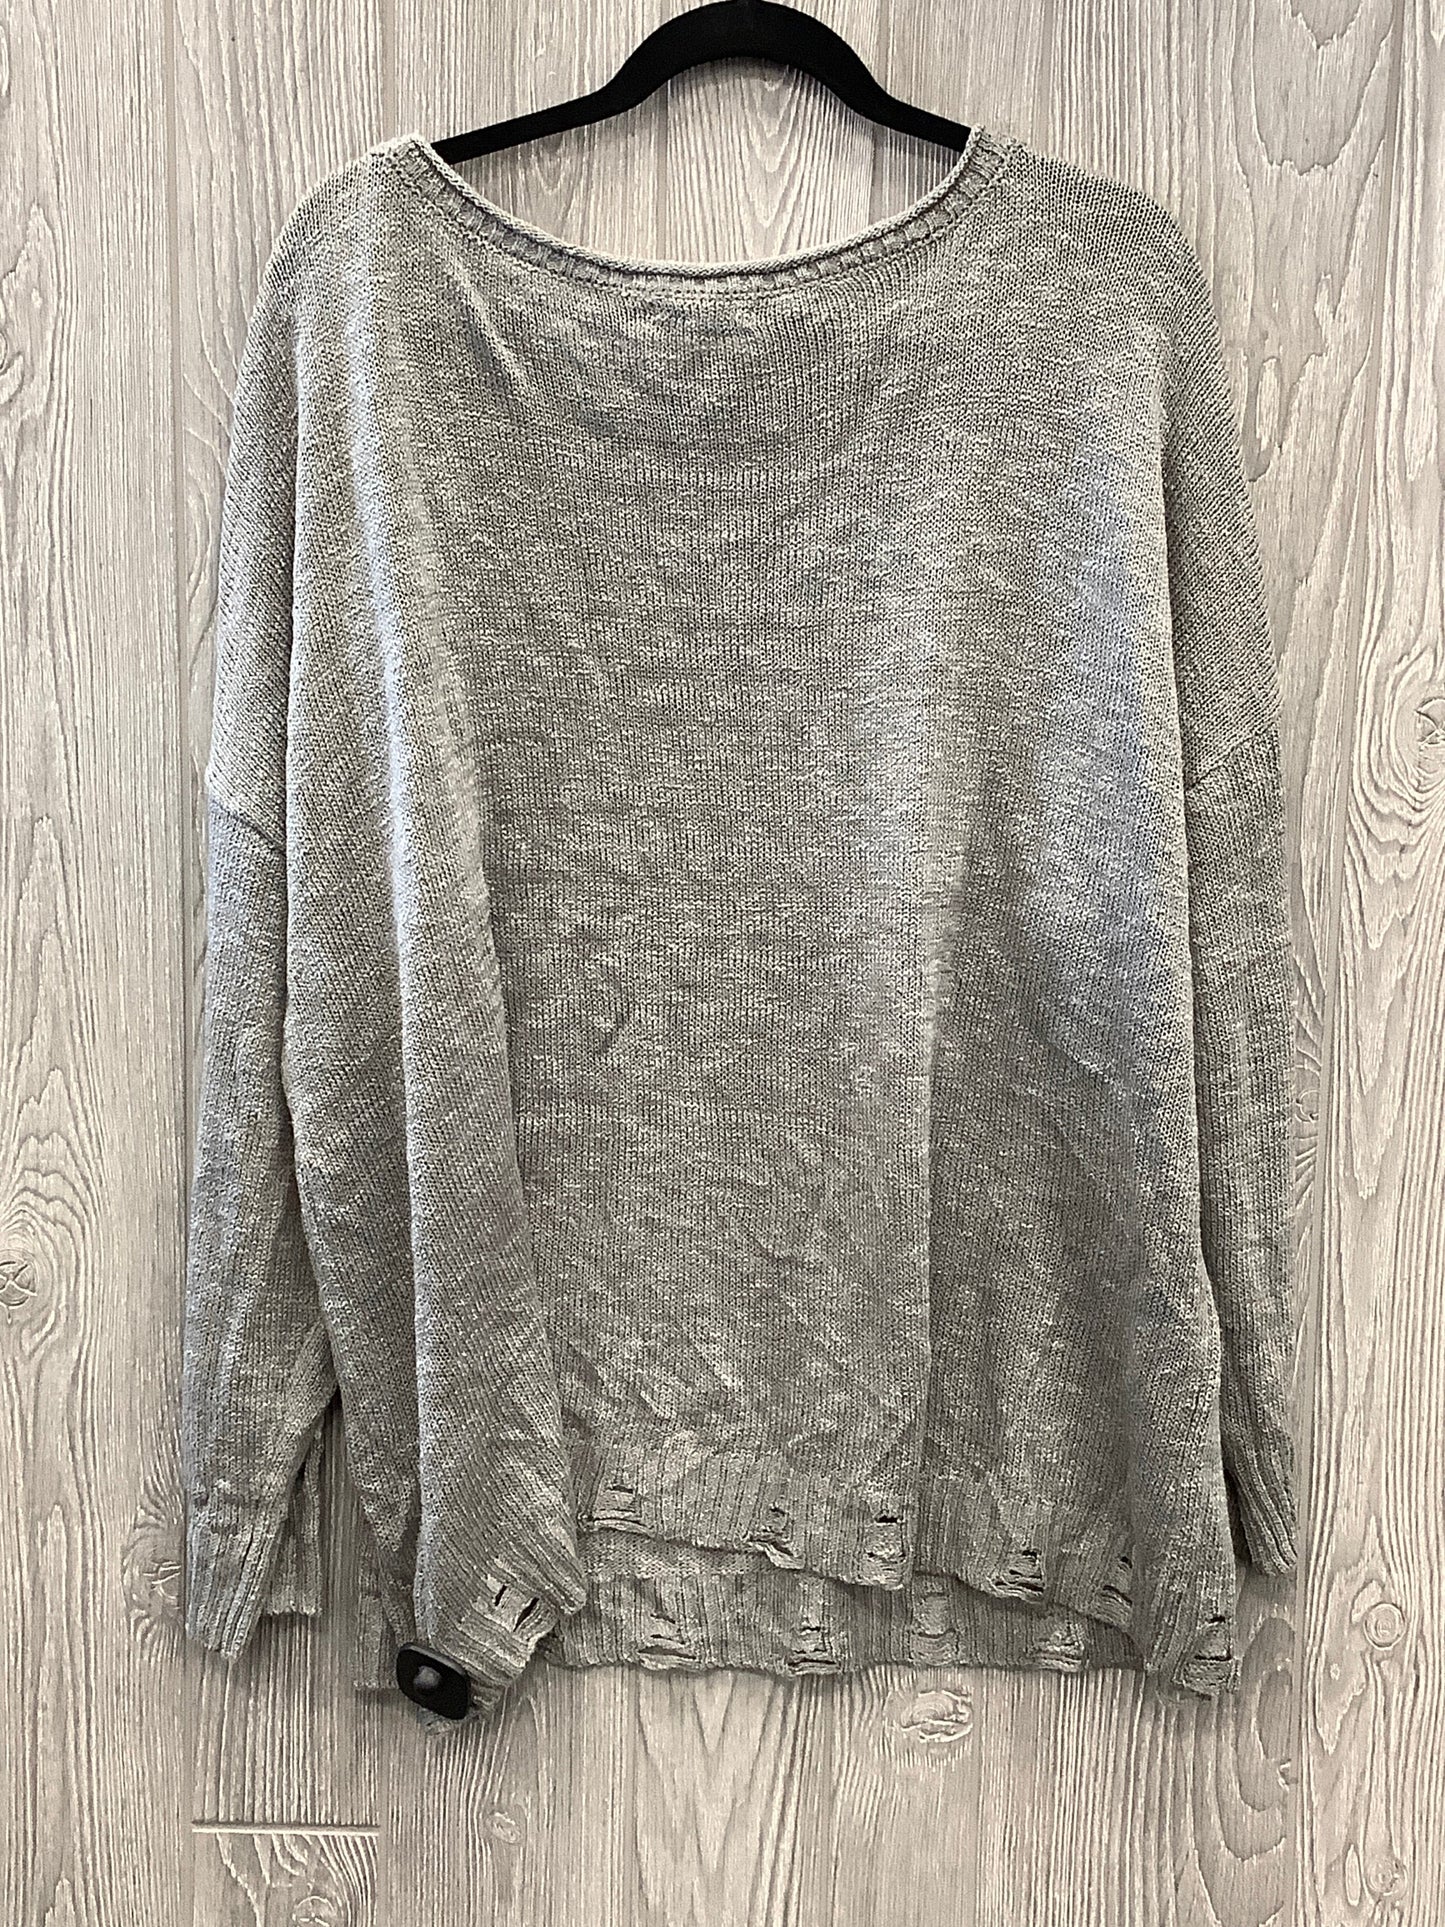 Sweater By Maurices  Size: 3x